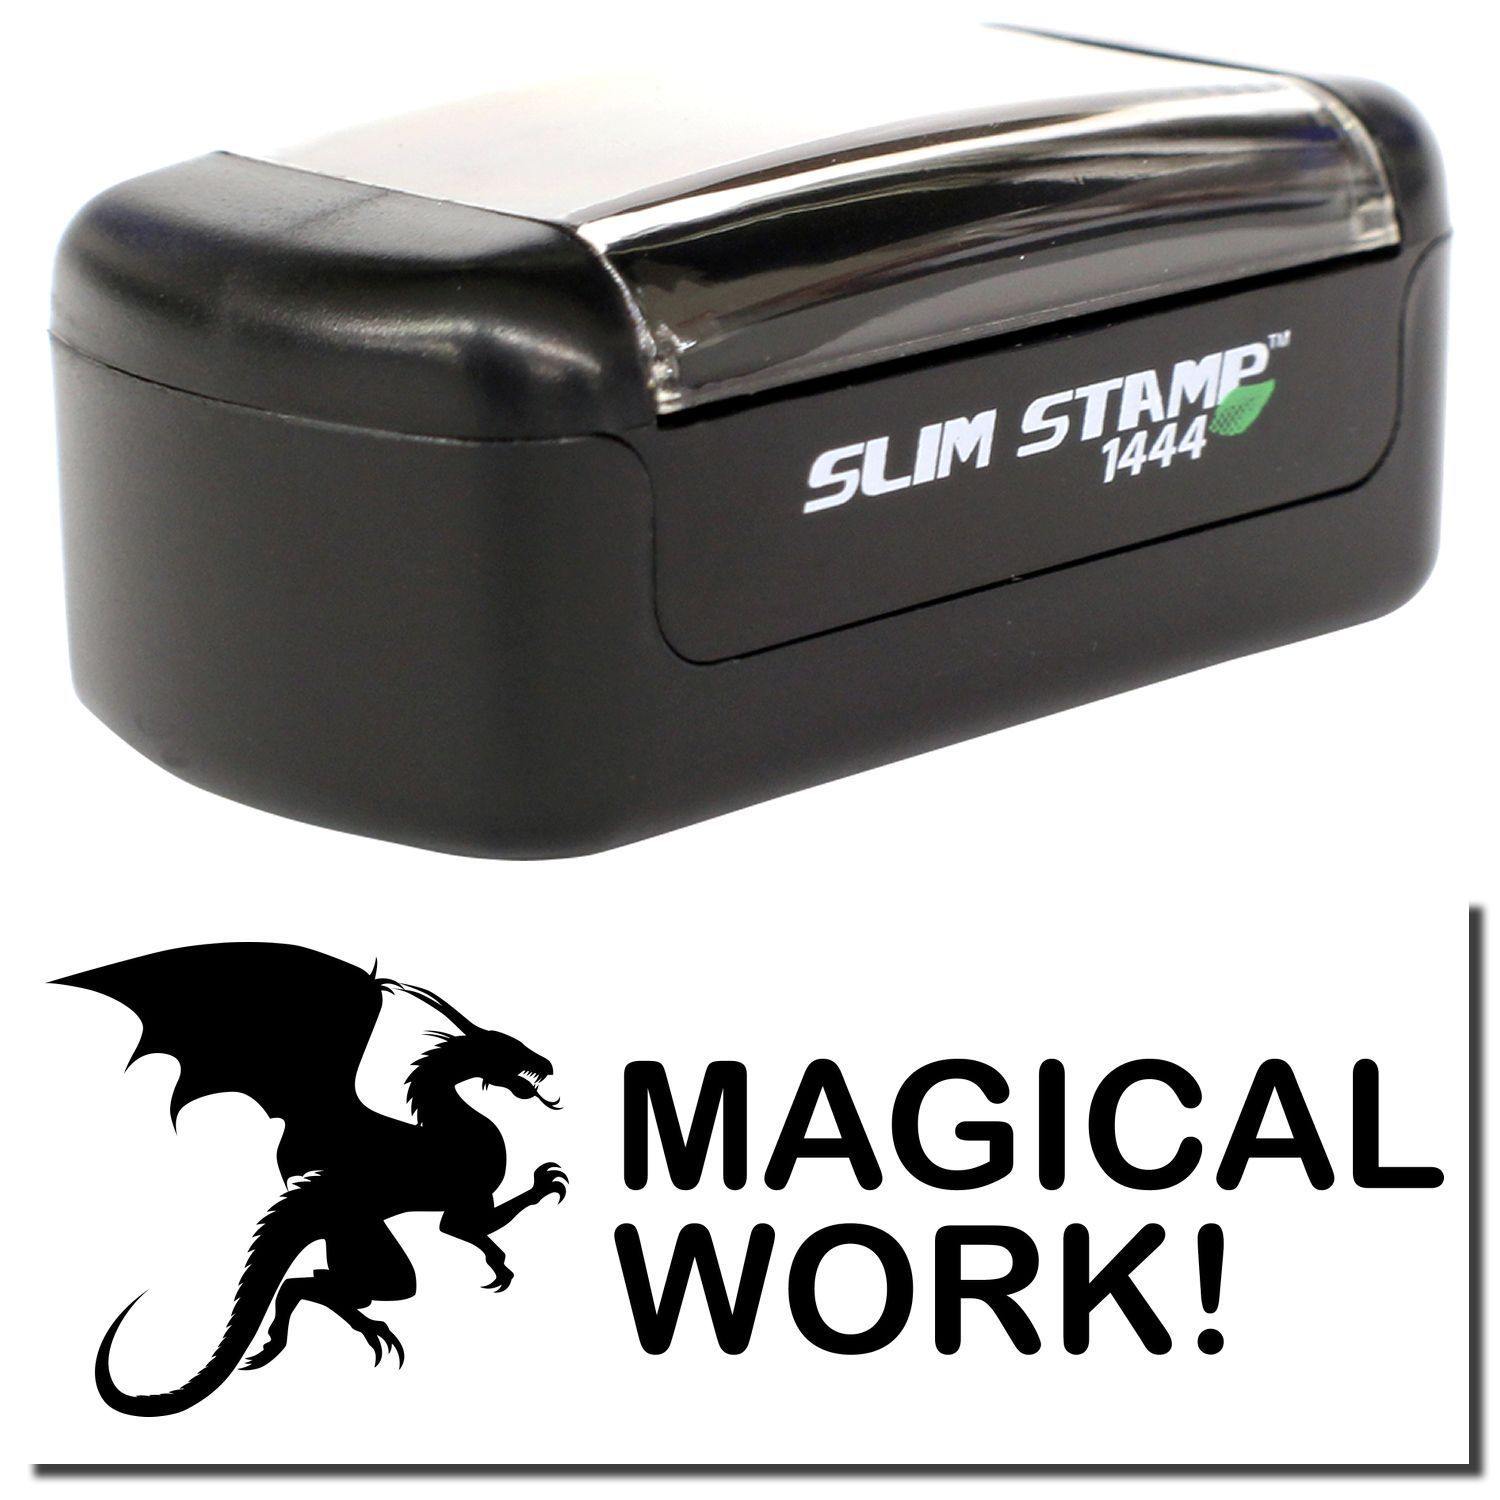 A stock office pre-inked stamp with a stamped image showing how the text "MAGICAL WORK!" with an image of a dragon on the left side is displayed after stamping.